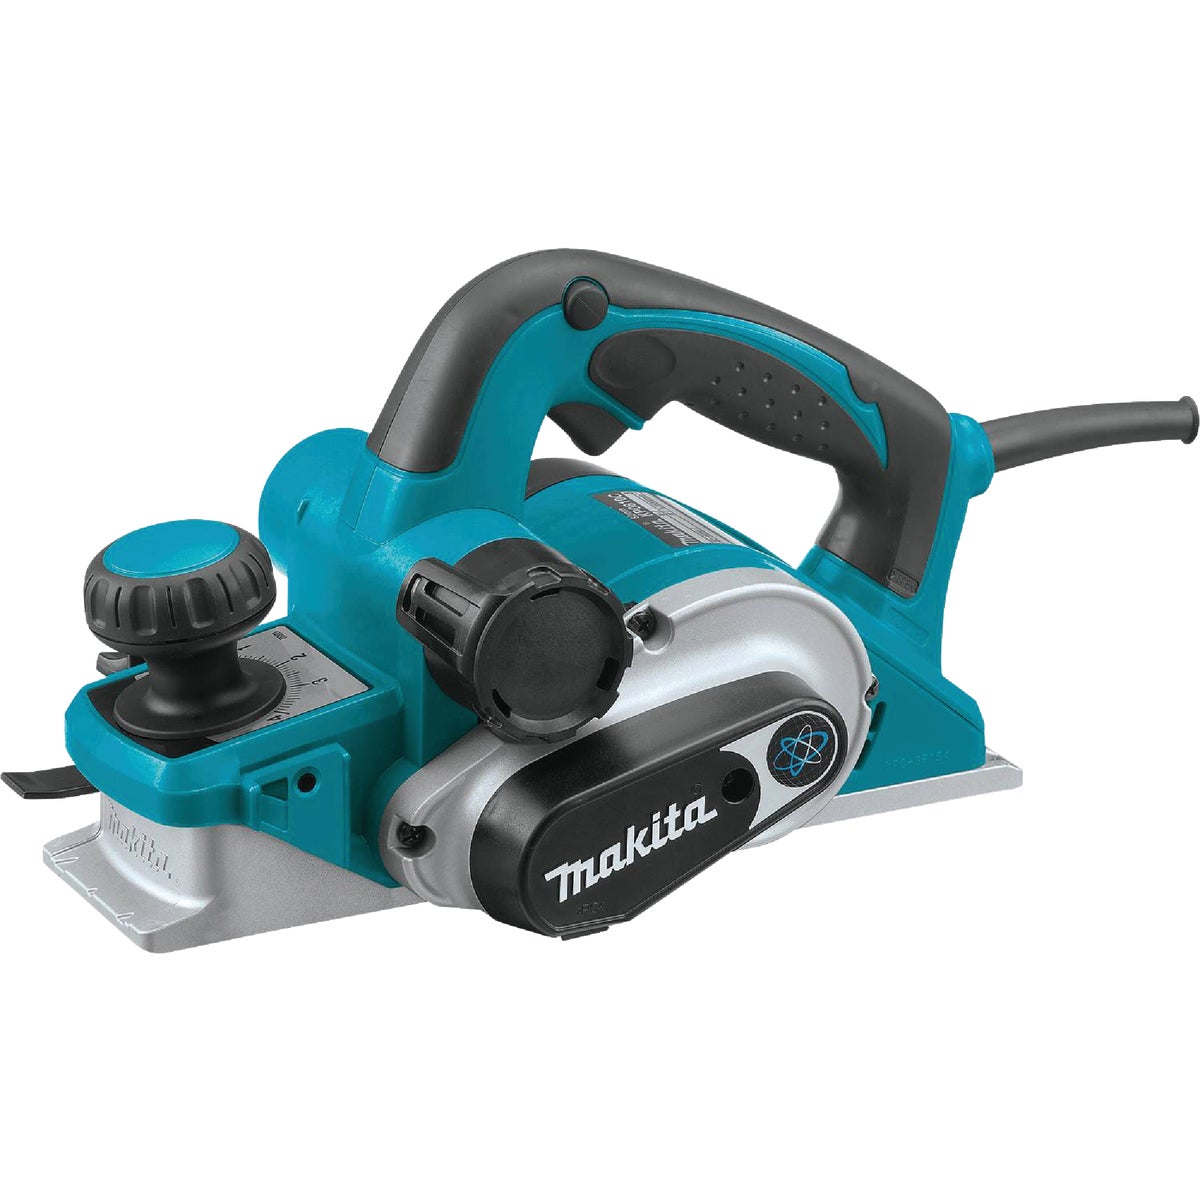 Makita 7.5A 3-1/4 In. 5/32 In. Planing Depth Planer